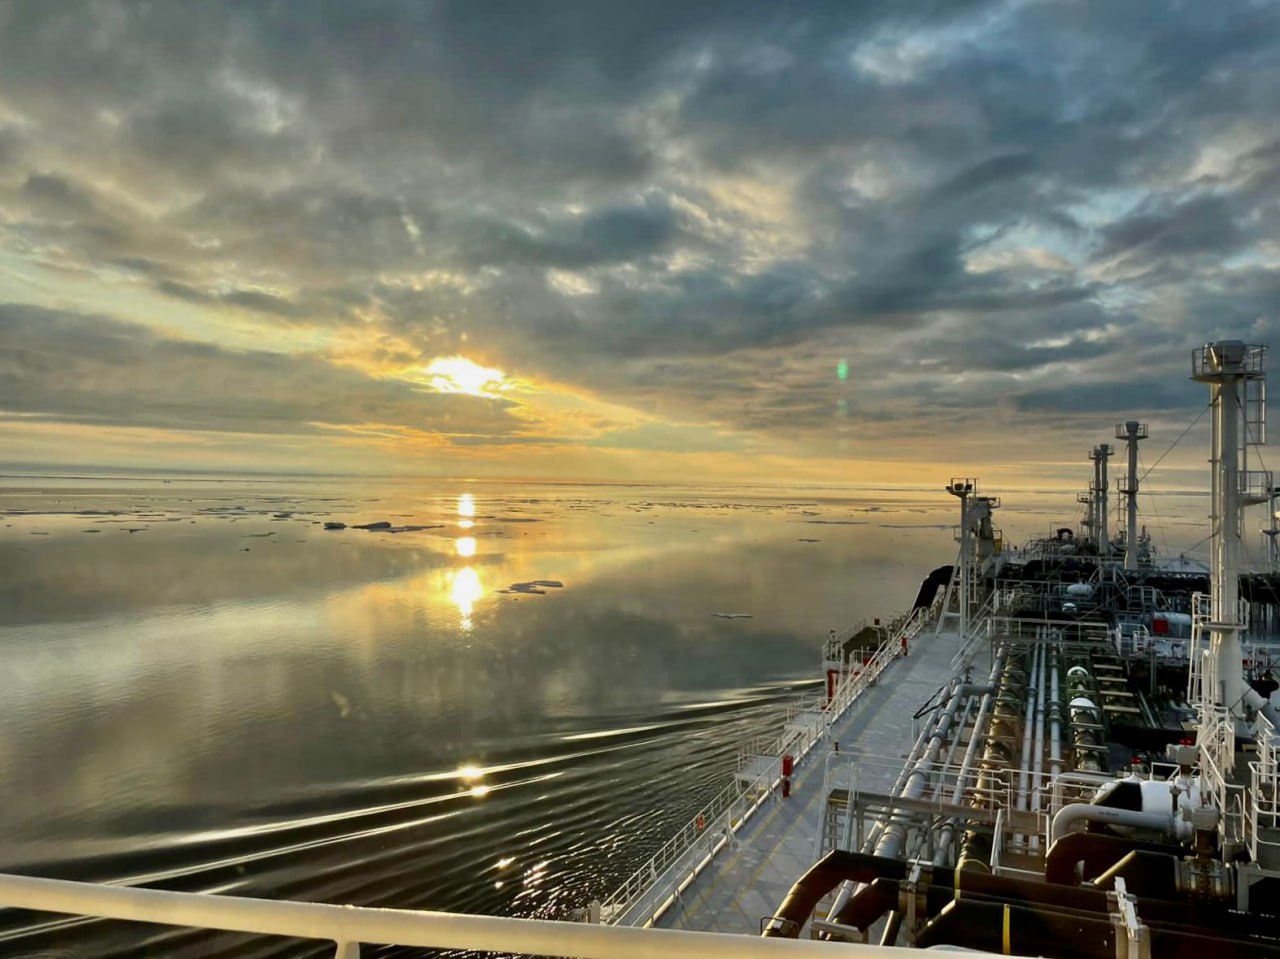 Gazprom delivers first LNG cargo to China via NSR